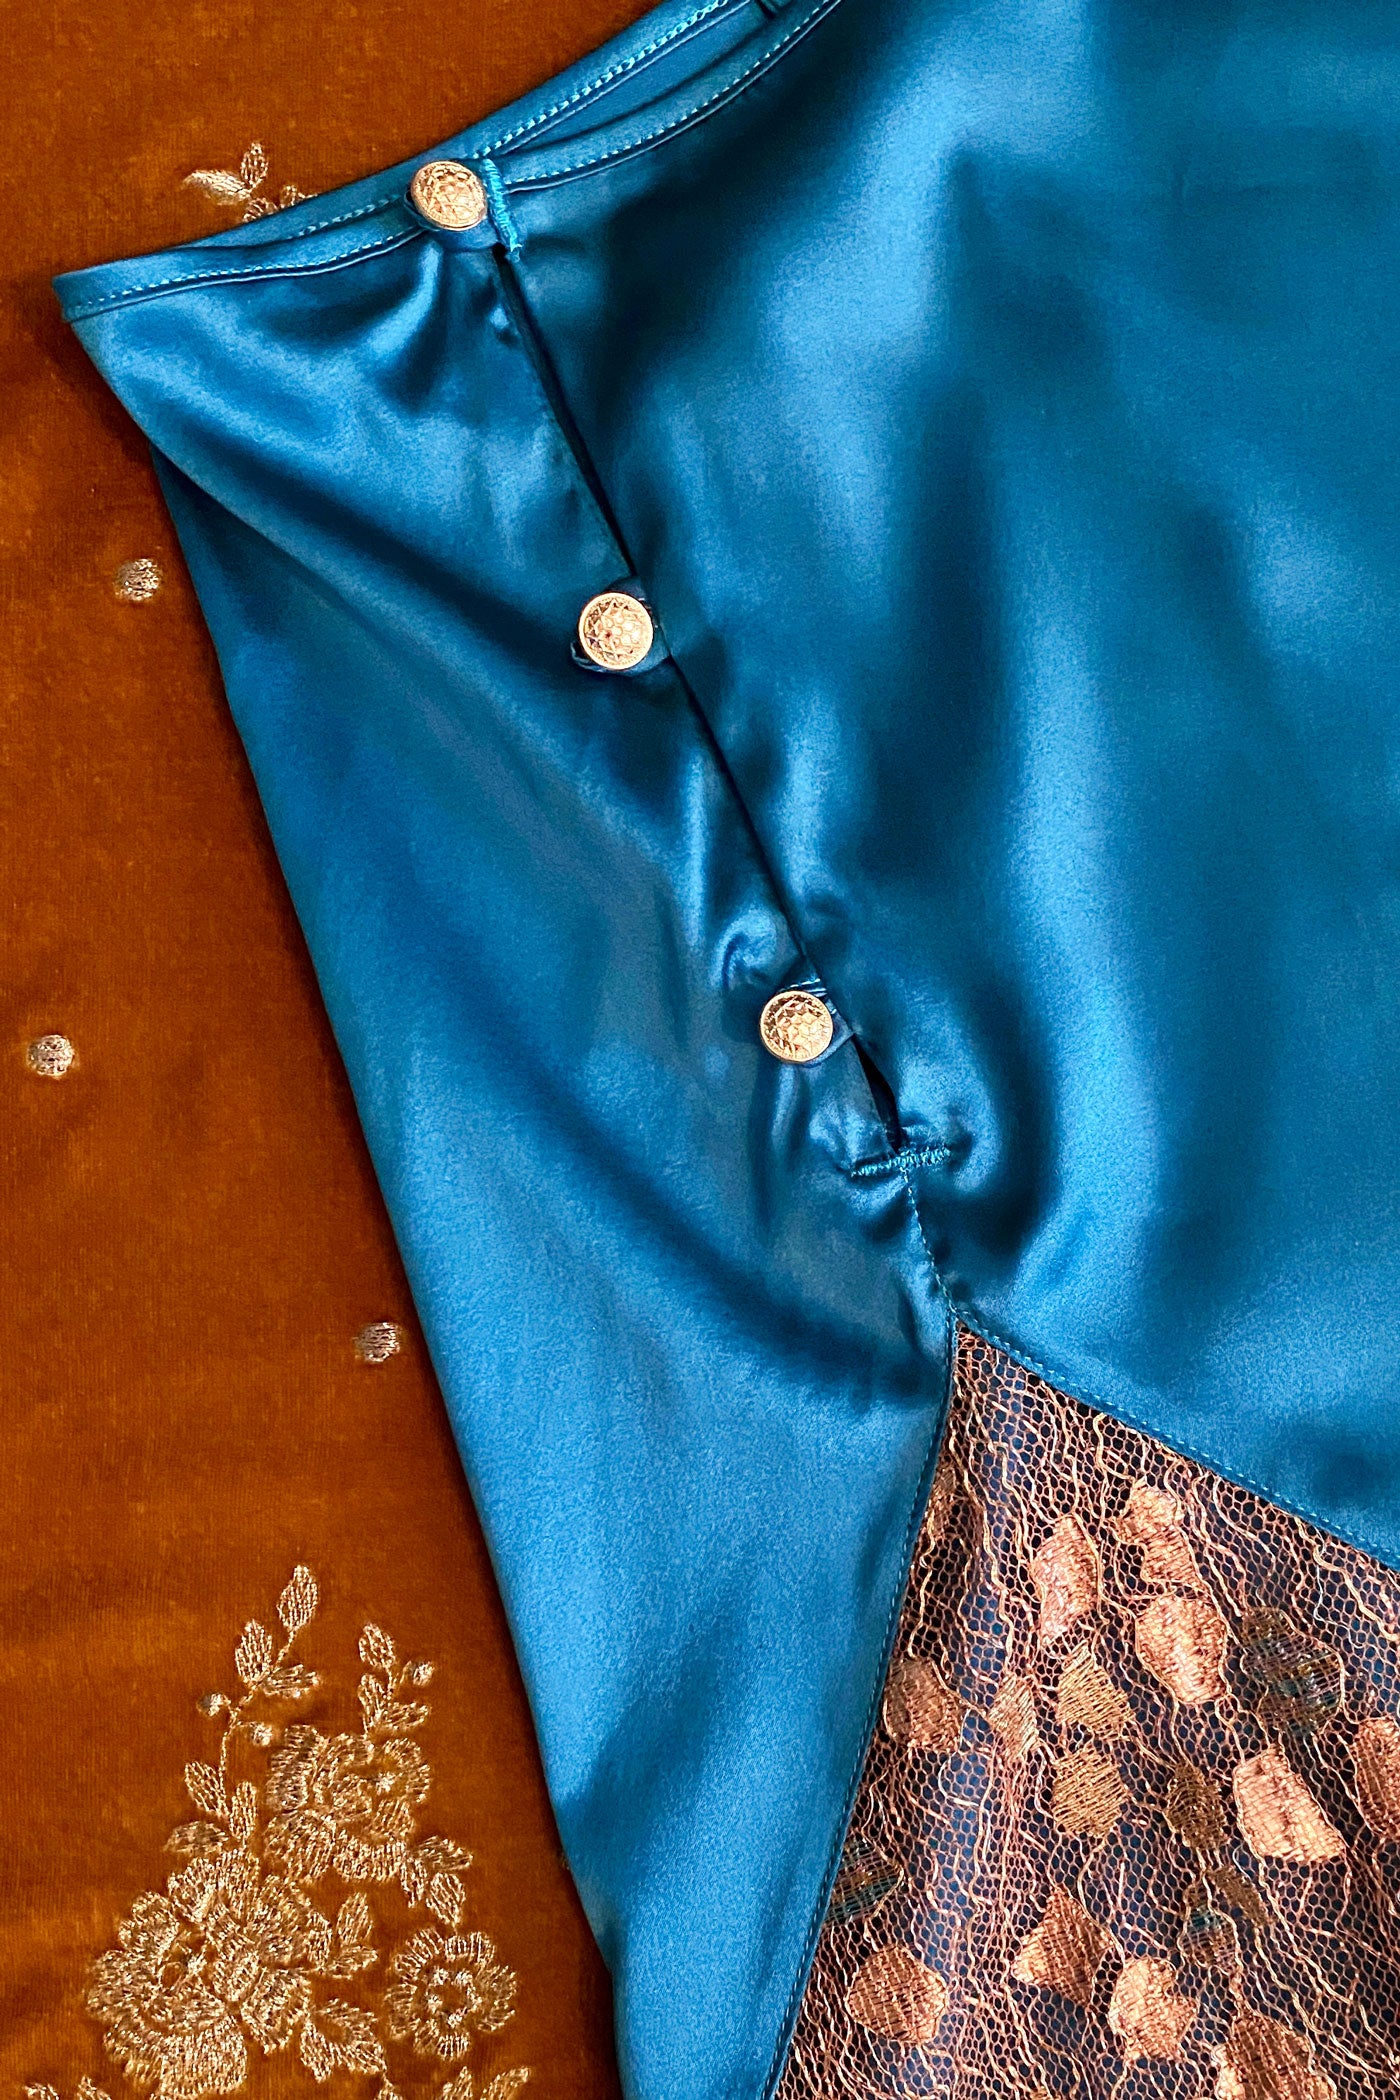 Button detail on blue silk tap pants with gold lace insert